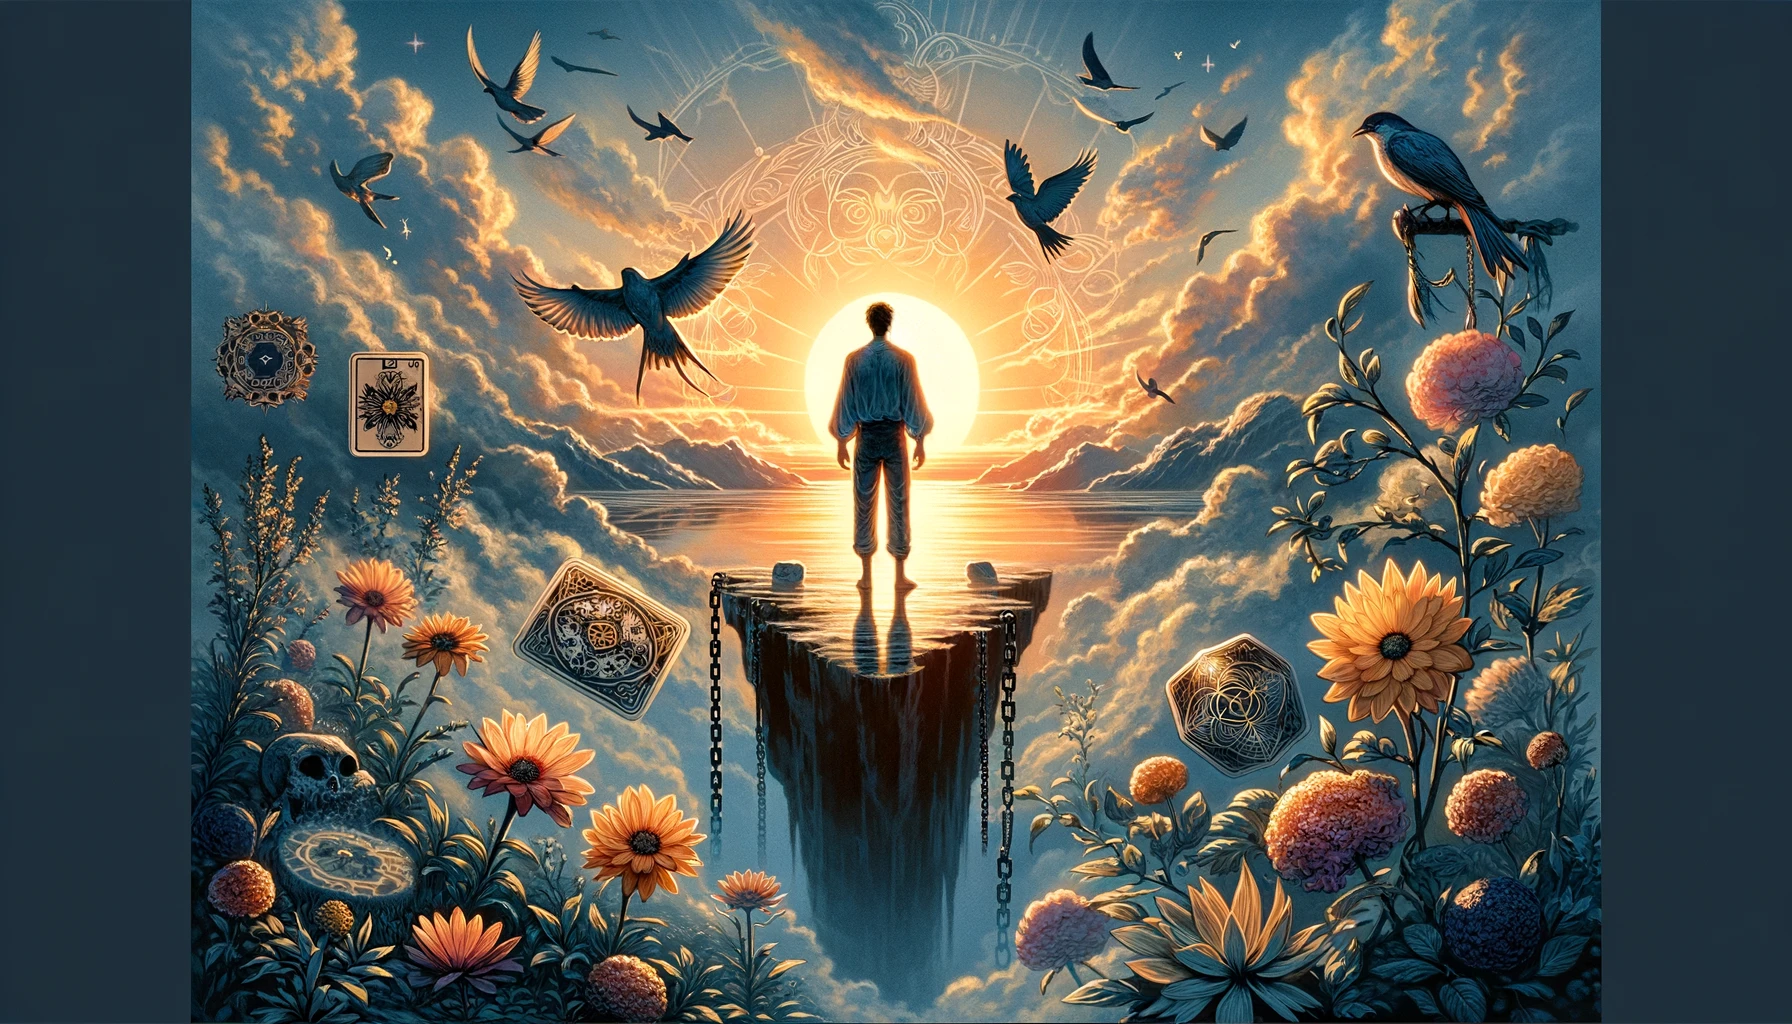 "A powerful visualization depicting an individual at the brink of a transformative moment, gazing towards a horizon illuminated by the dawn of a new day. The scene symbolizes hope, renewal, and the emotional liberation that accompanies embracing one's true path. Surrounding symbols of liberation and awakening emphasize the release from past burdens and the journey towards emotional well-being and fulfillment. Through its imagery, viewers are invited to contemplate the transformative power of embracing change and the potential for personal growth and renewal."